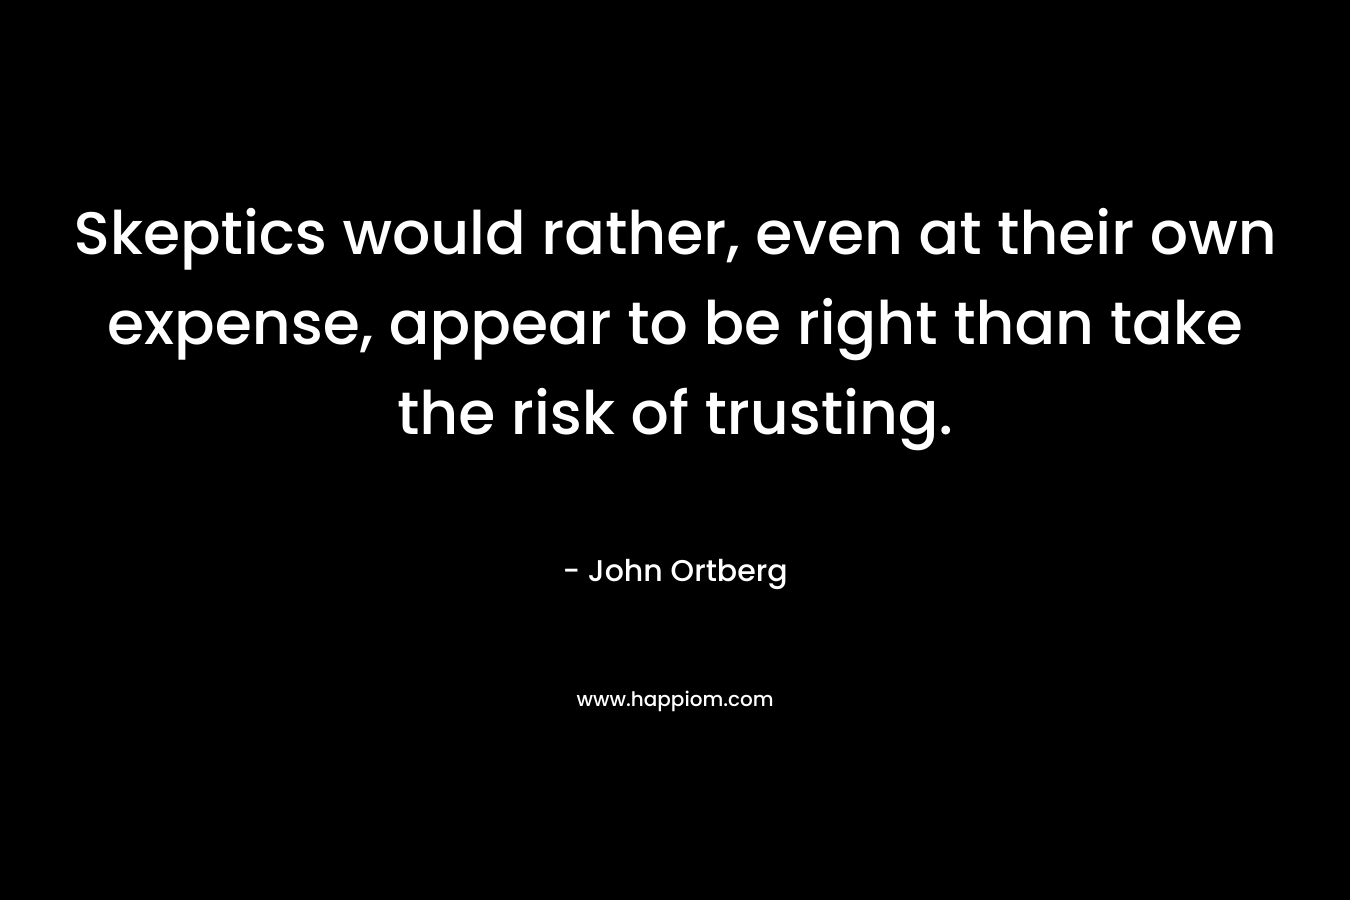 Skeptics would rather, even at their own expense, appear to be right than take the risk of trusting.